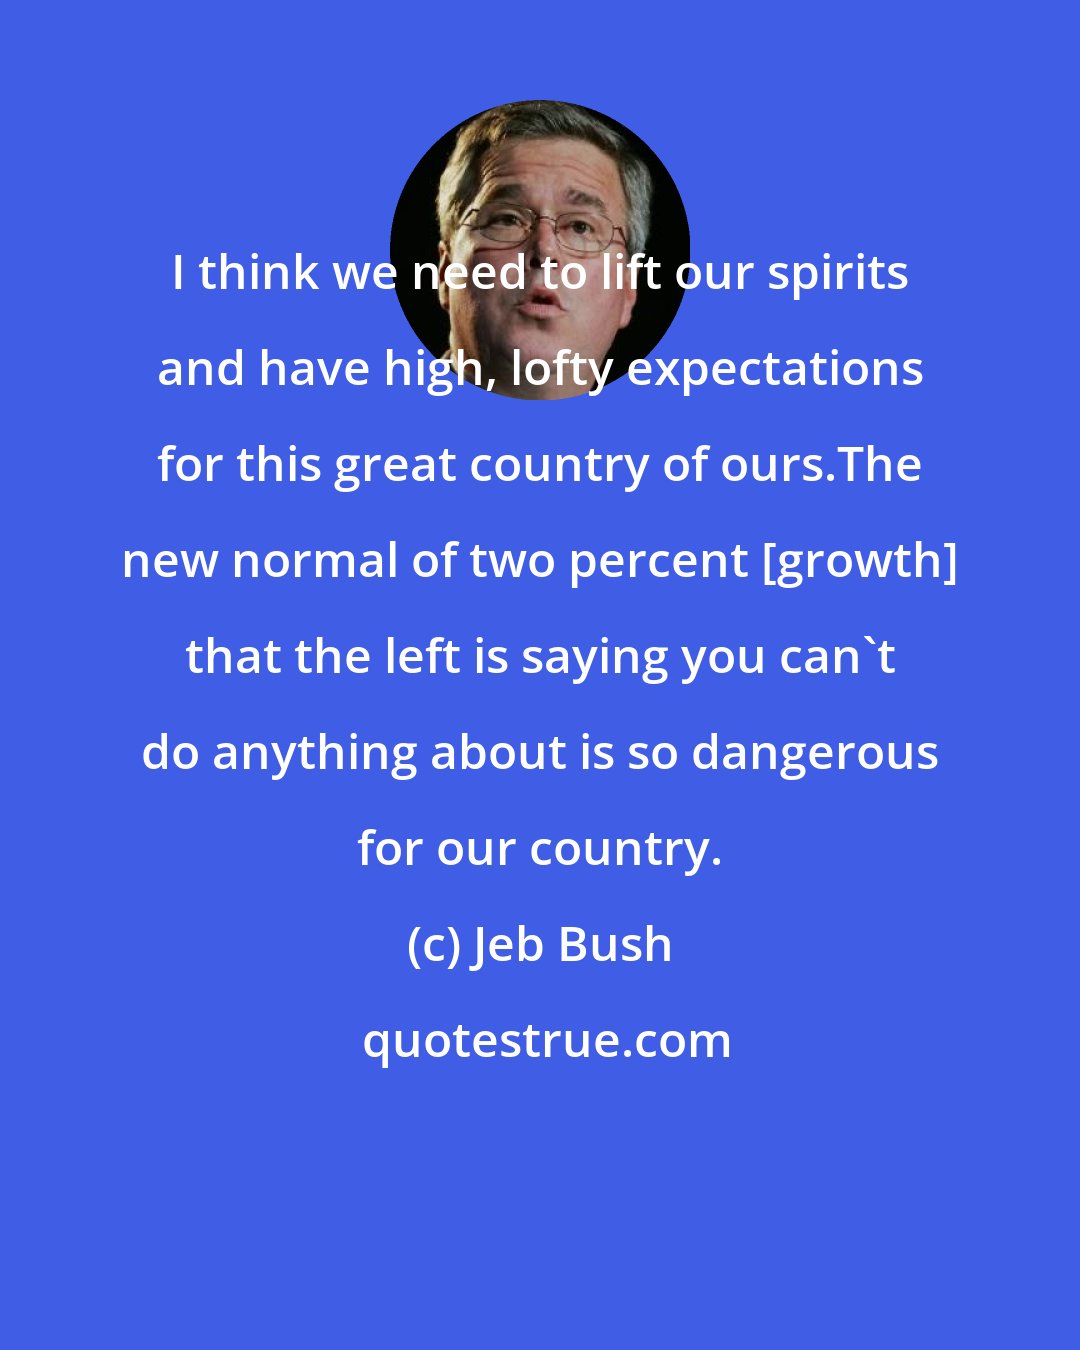 Jeb Bush: I think we need to lift our spirits and have high, lofty expectations for this great country of ours.The new normal of two percent [growth] that the left is saying you can't do anything about is so dangerous for our country.